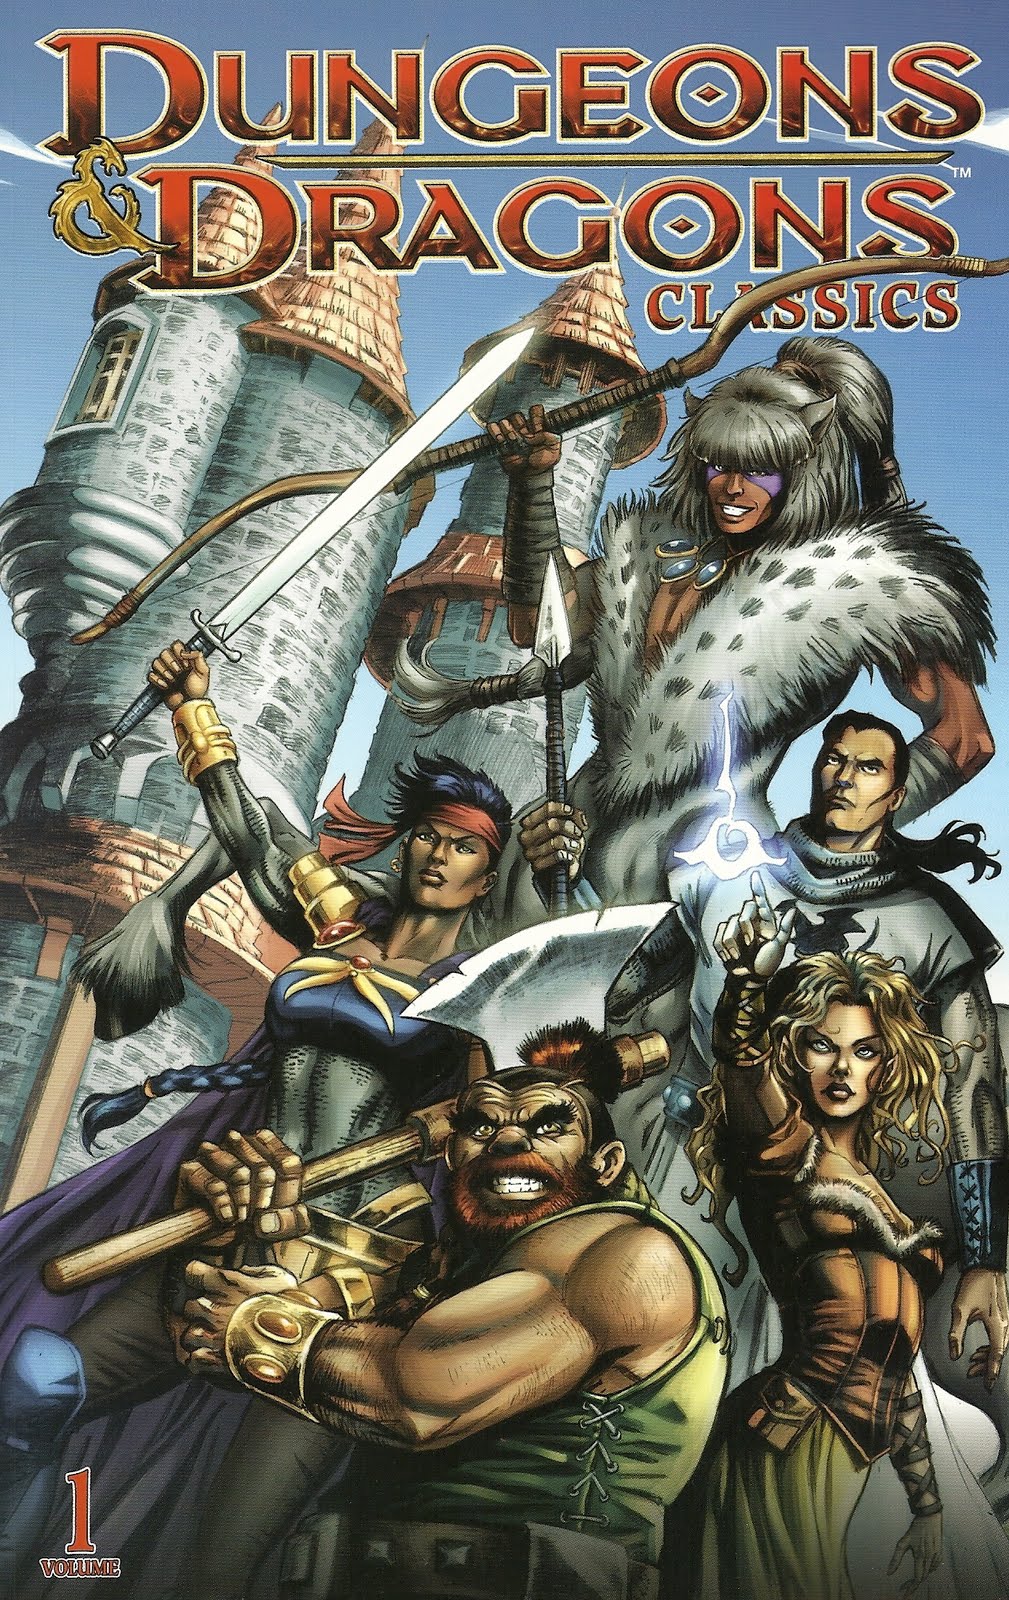 Dungeons & Dragons - Wikipedia, the free.